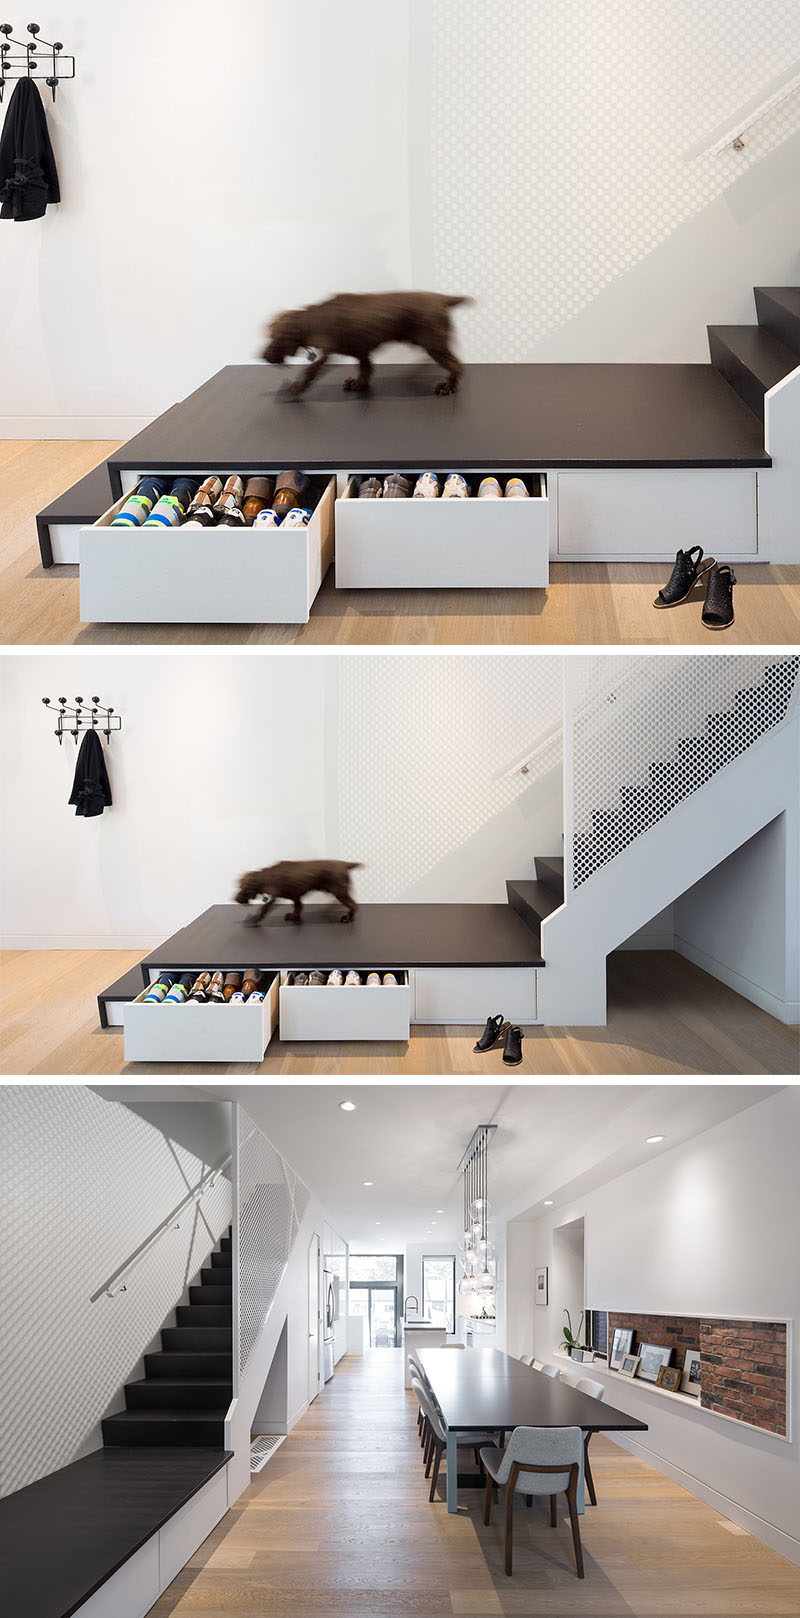 Stairs Design Ideas - This home has three hidden drawers located under the stair landing that are perfect for storing shoes and dog toys.